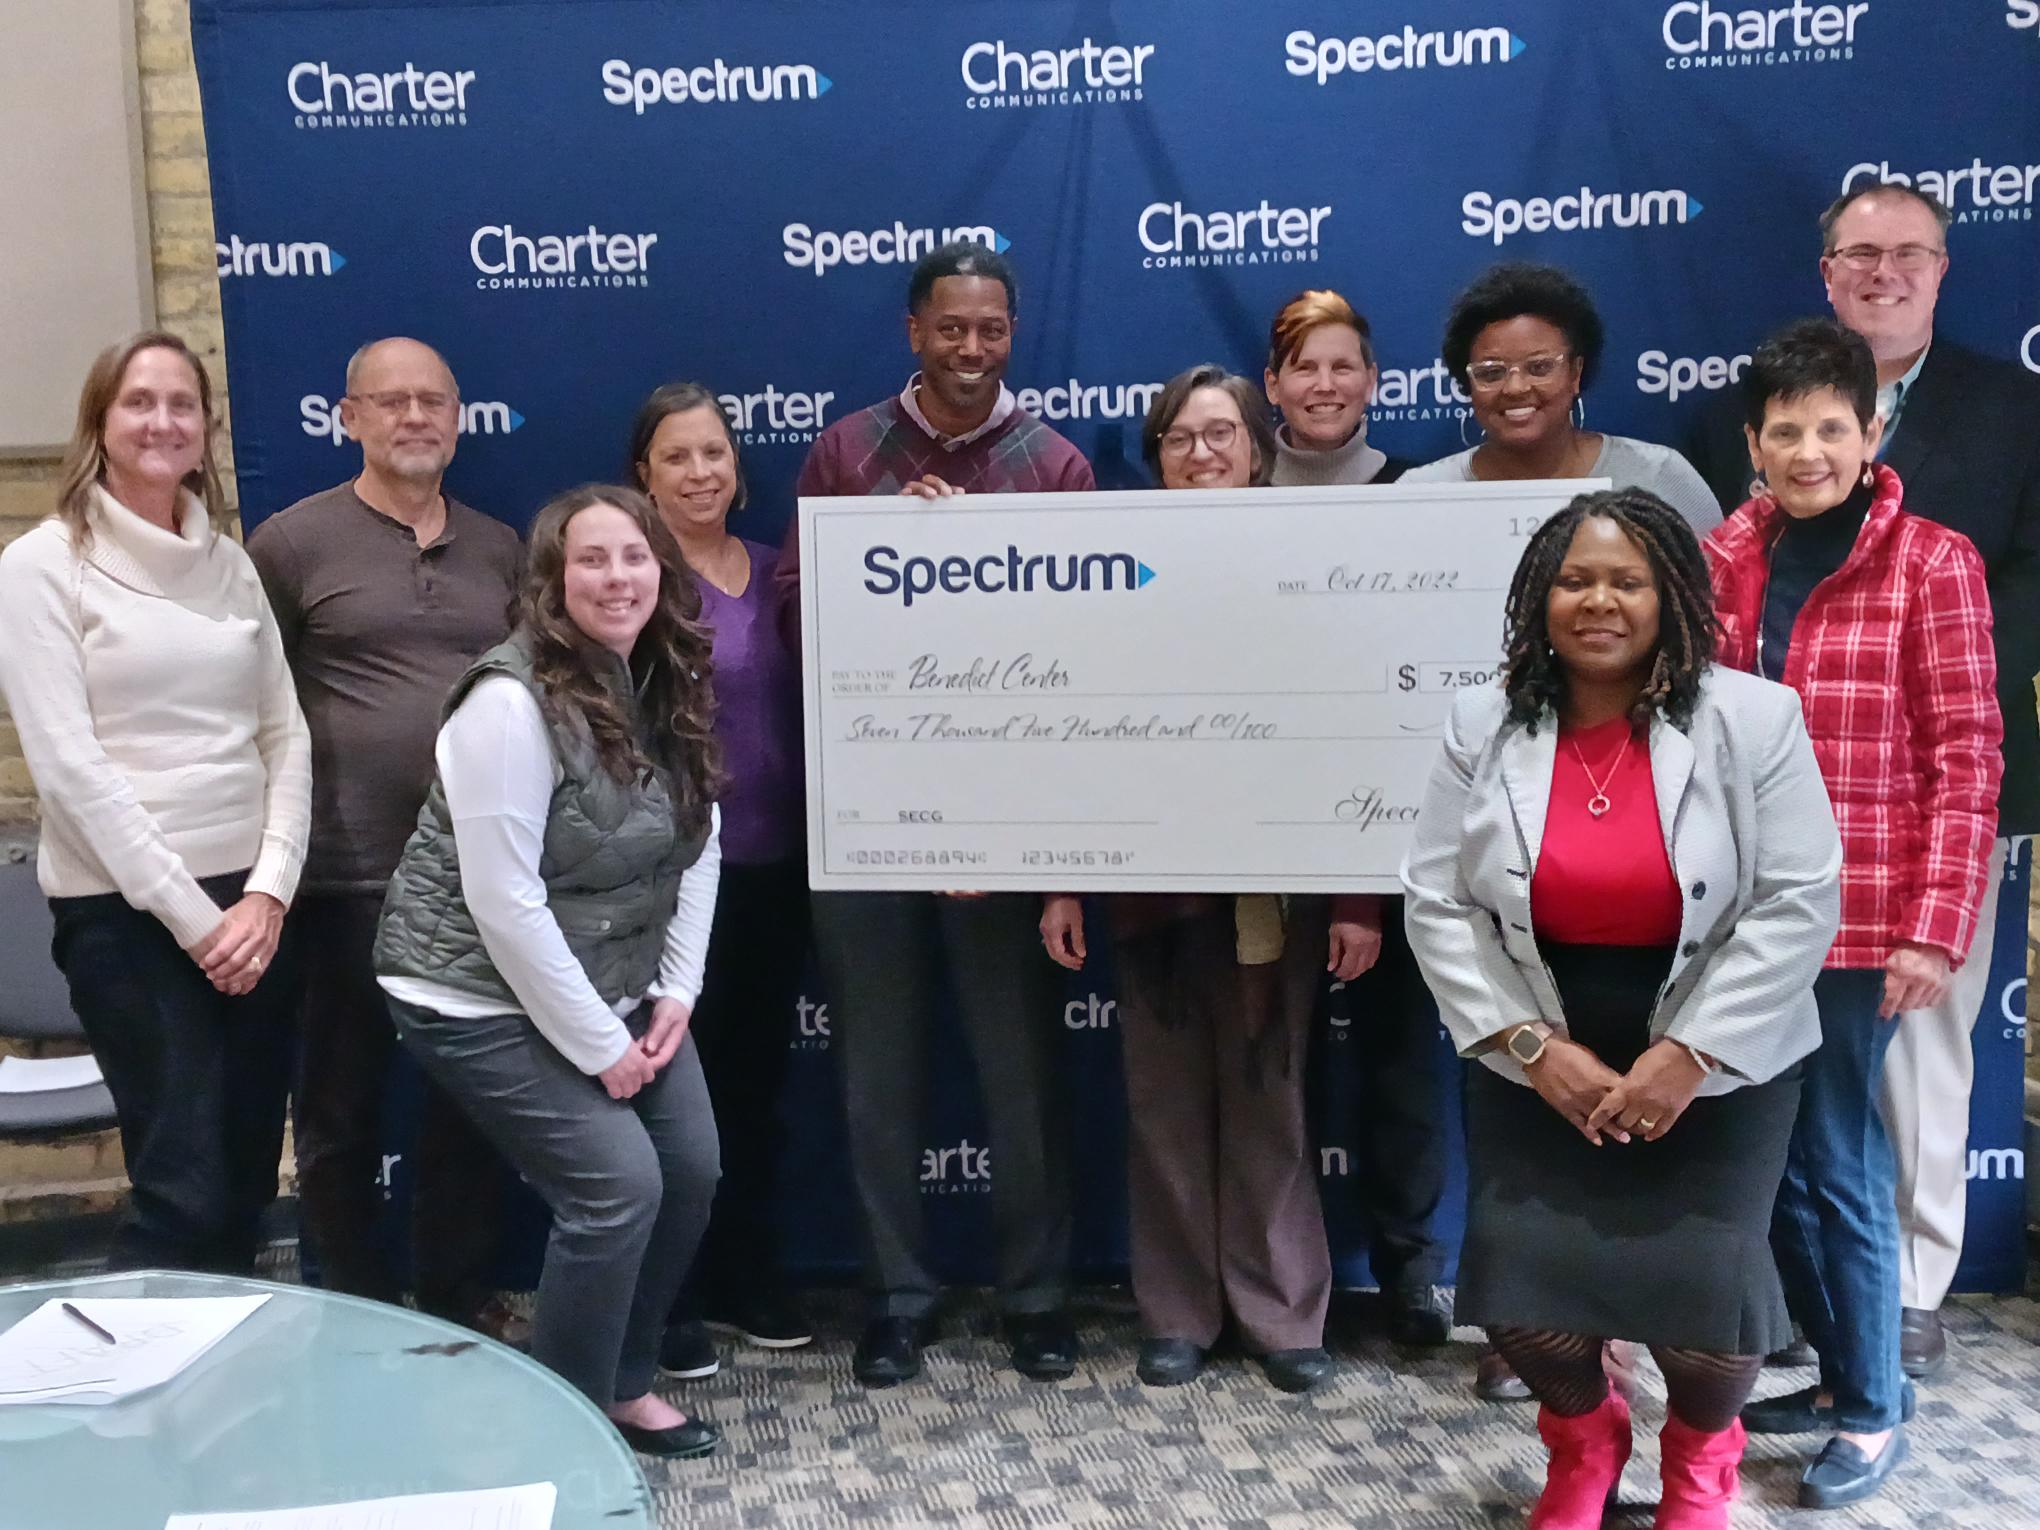 Spectrum Joins Milwaukee Alderwoman Milele Coggs to Award $7,500 Along with 25 Chromebooks to the Benedict Center